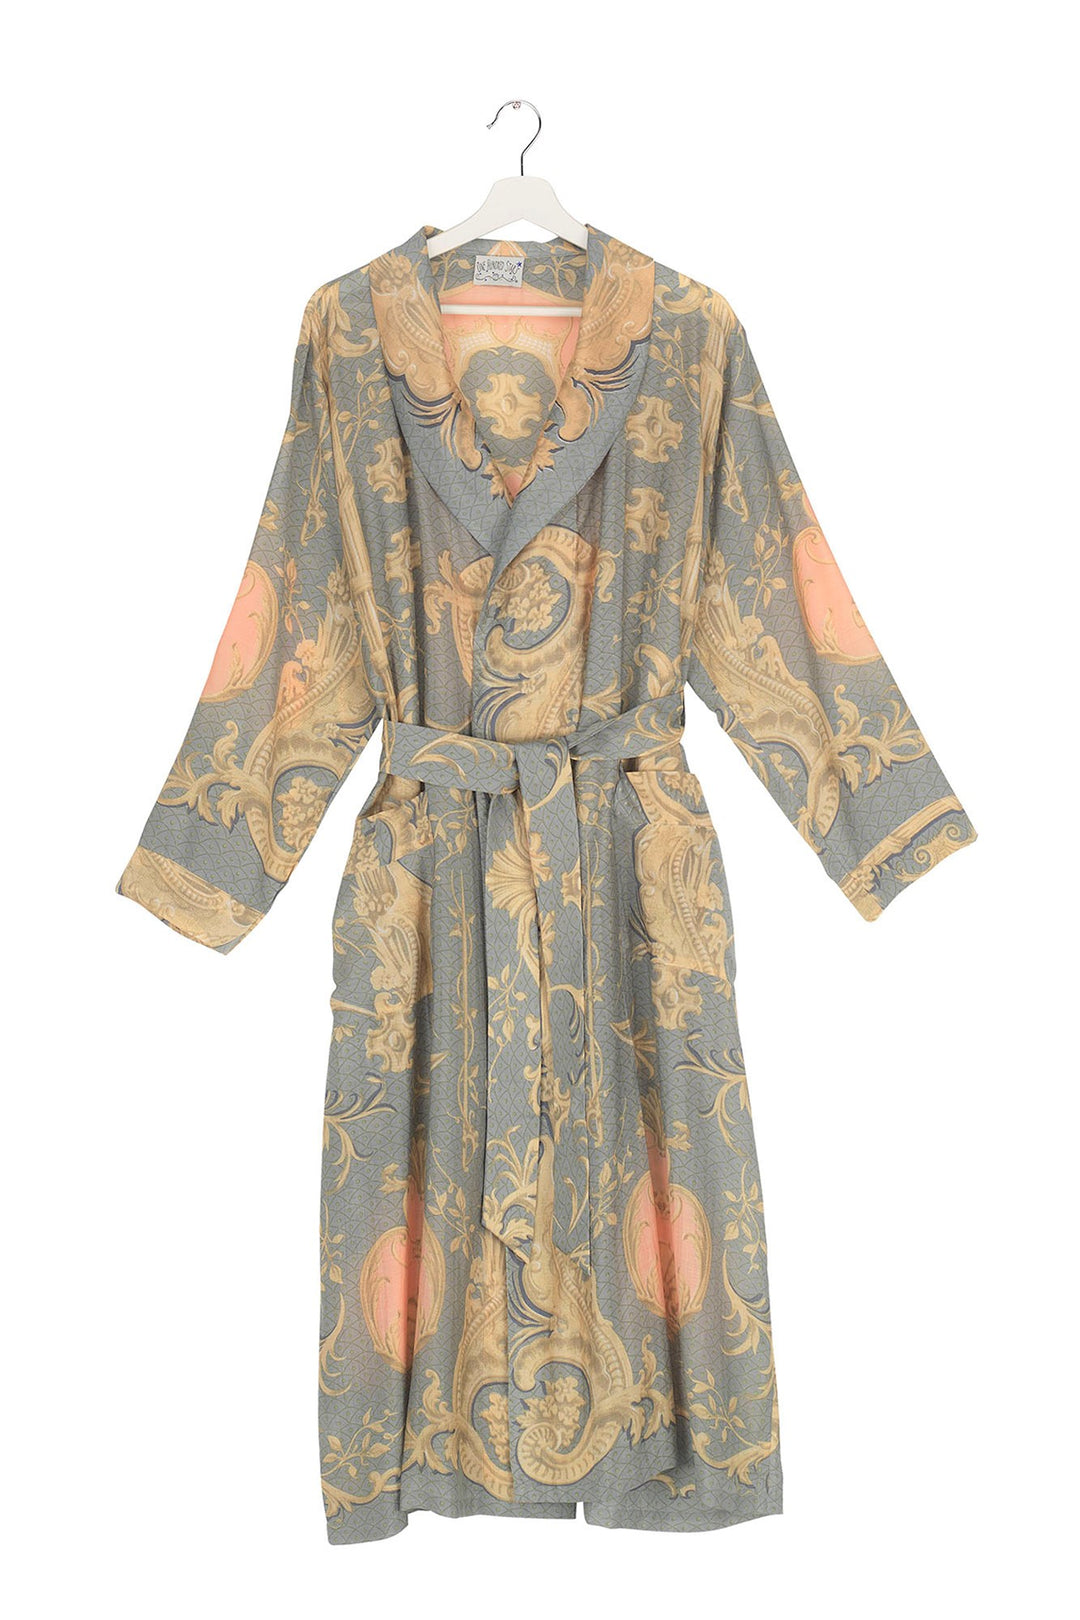 One Hundred Stars Rococo Grey Gown- This gown is perfect as a luxurious house coat or for layering as a chic accessory to your favourite outfit.